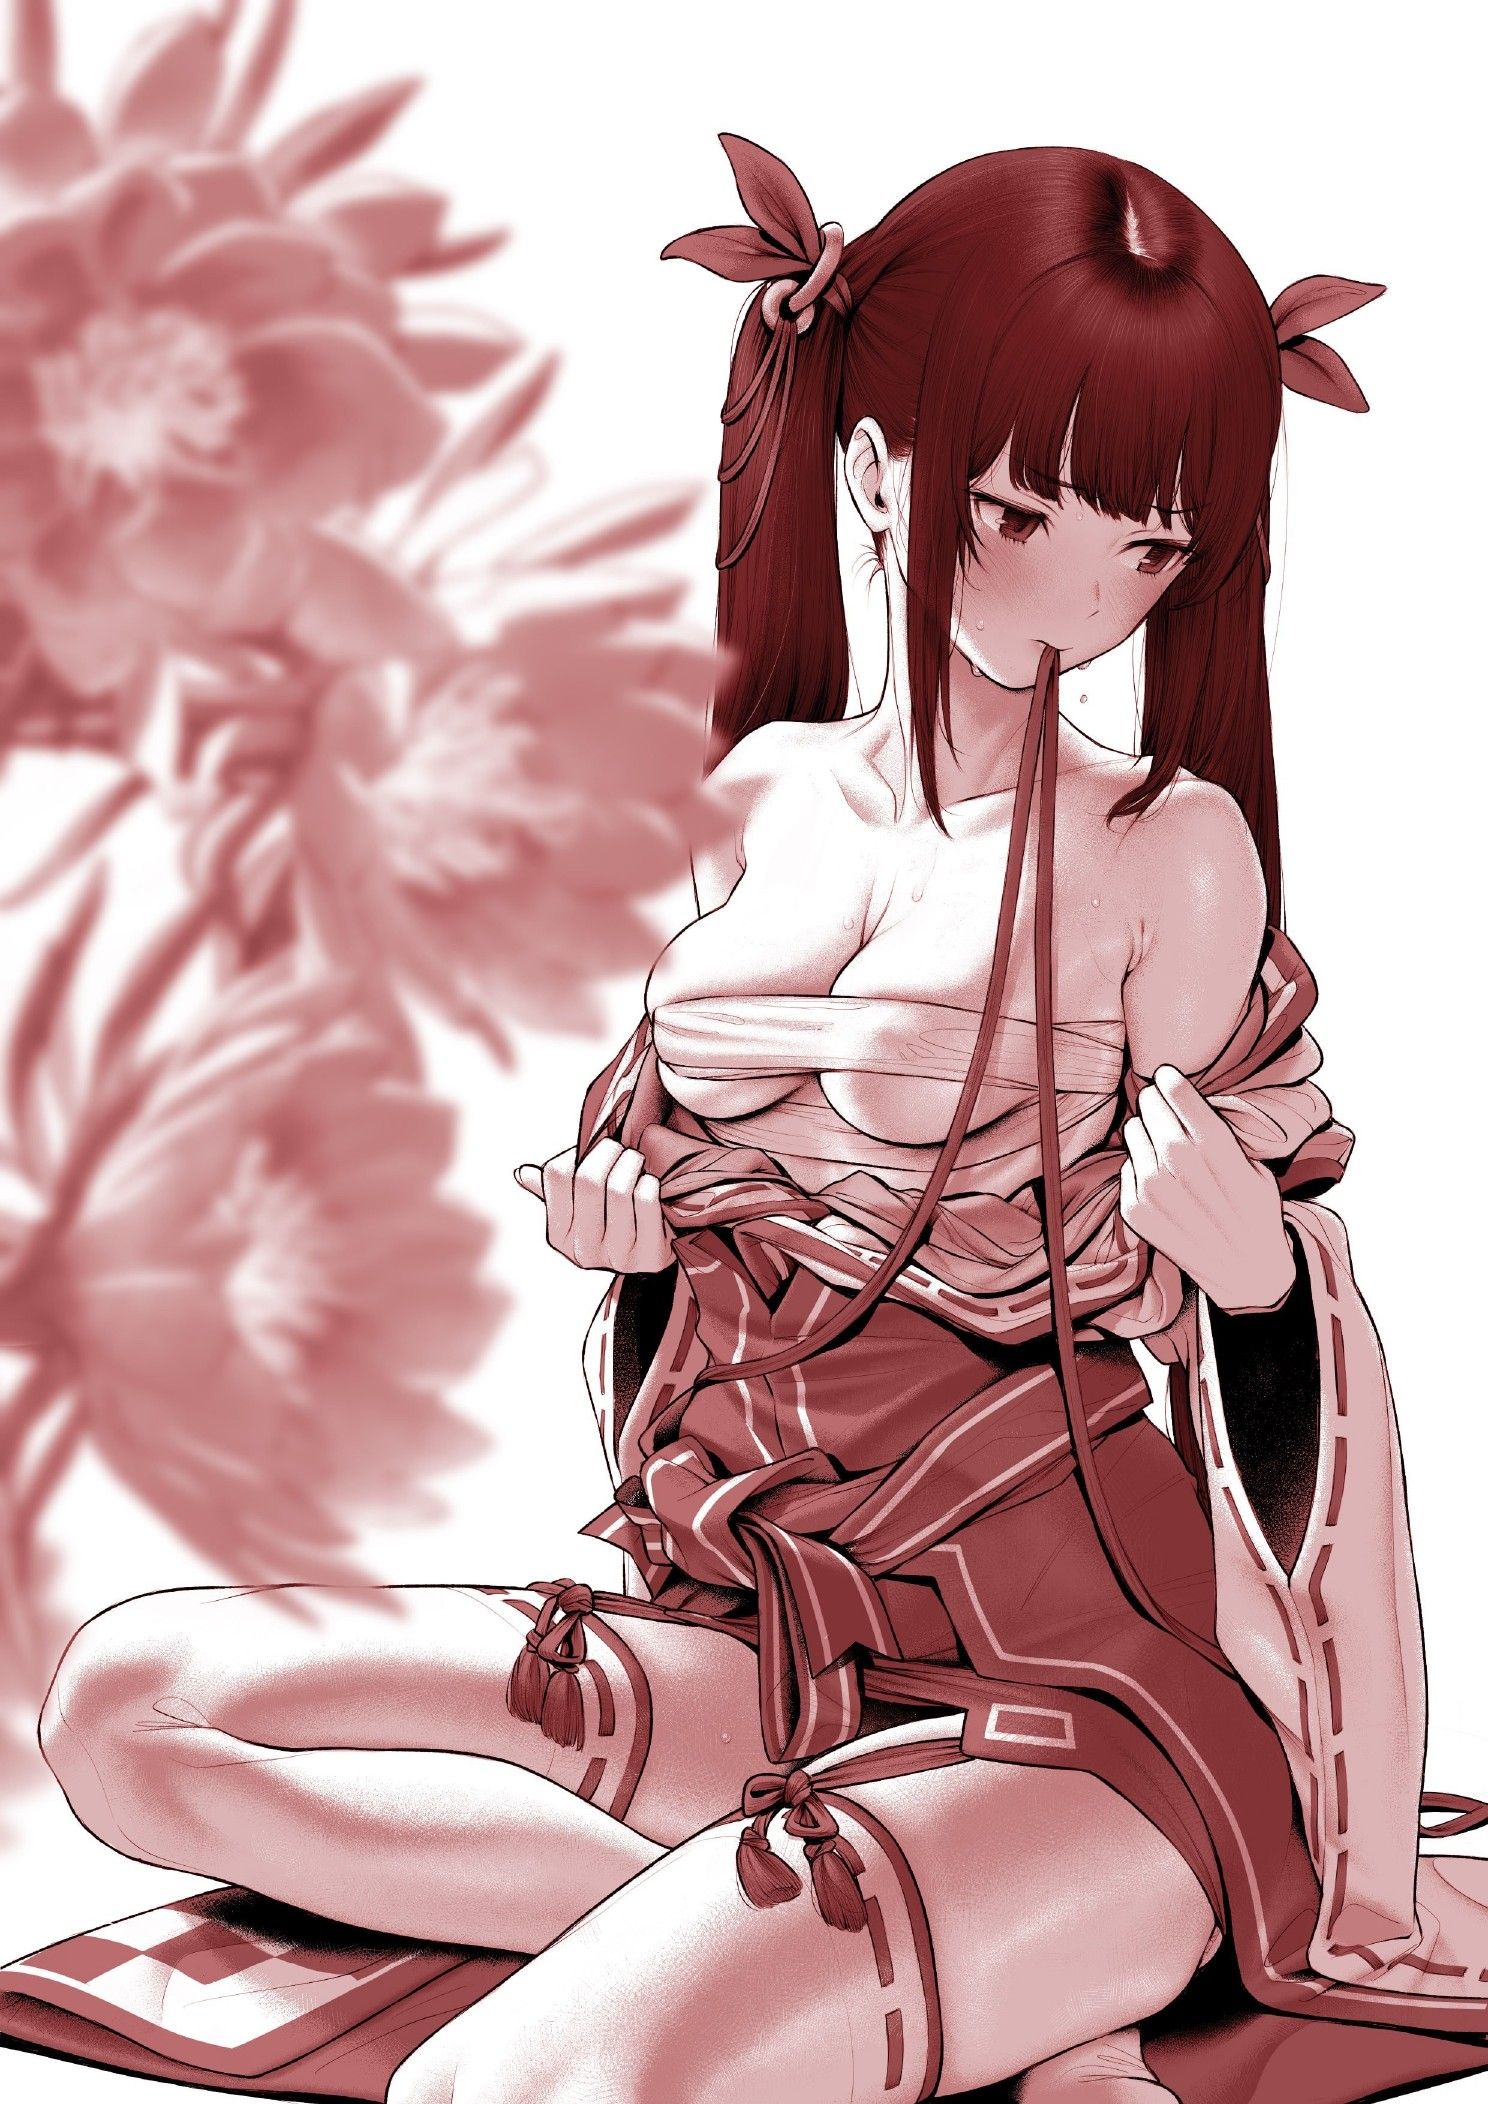 Secondary erotic girls in shrine maiden clothes nasty appearance erotic image [30 pieces] 16